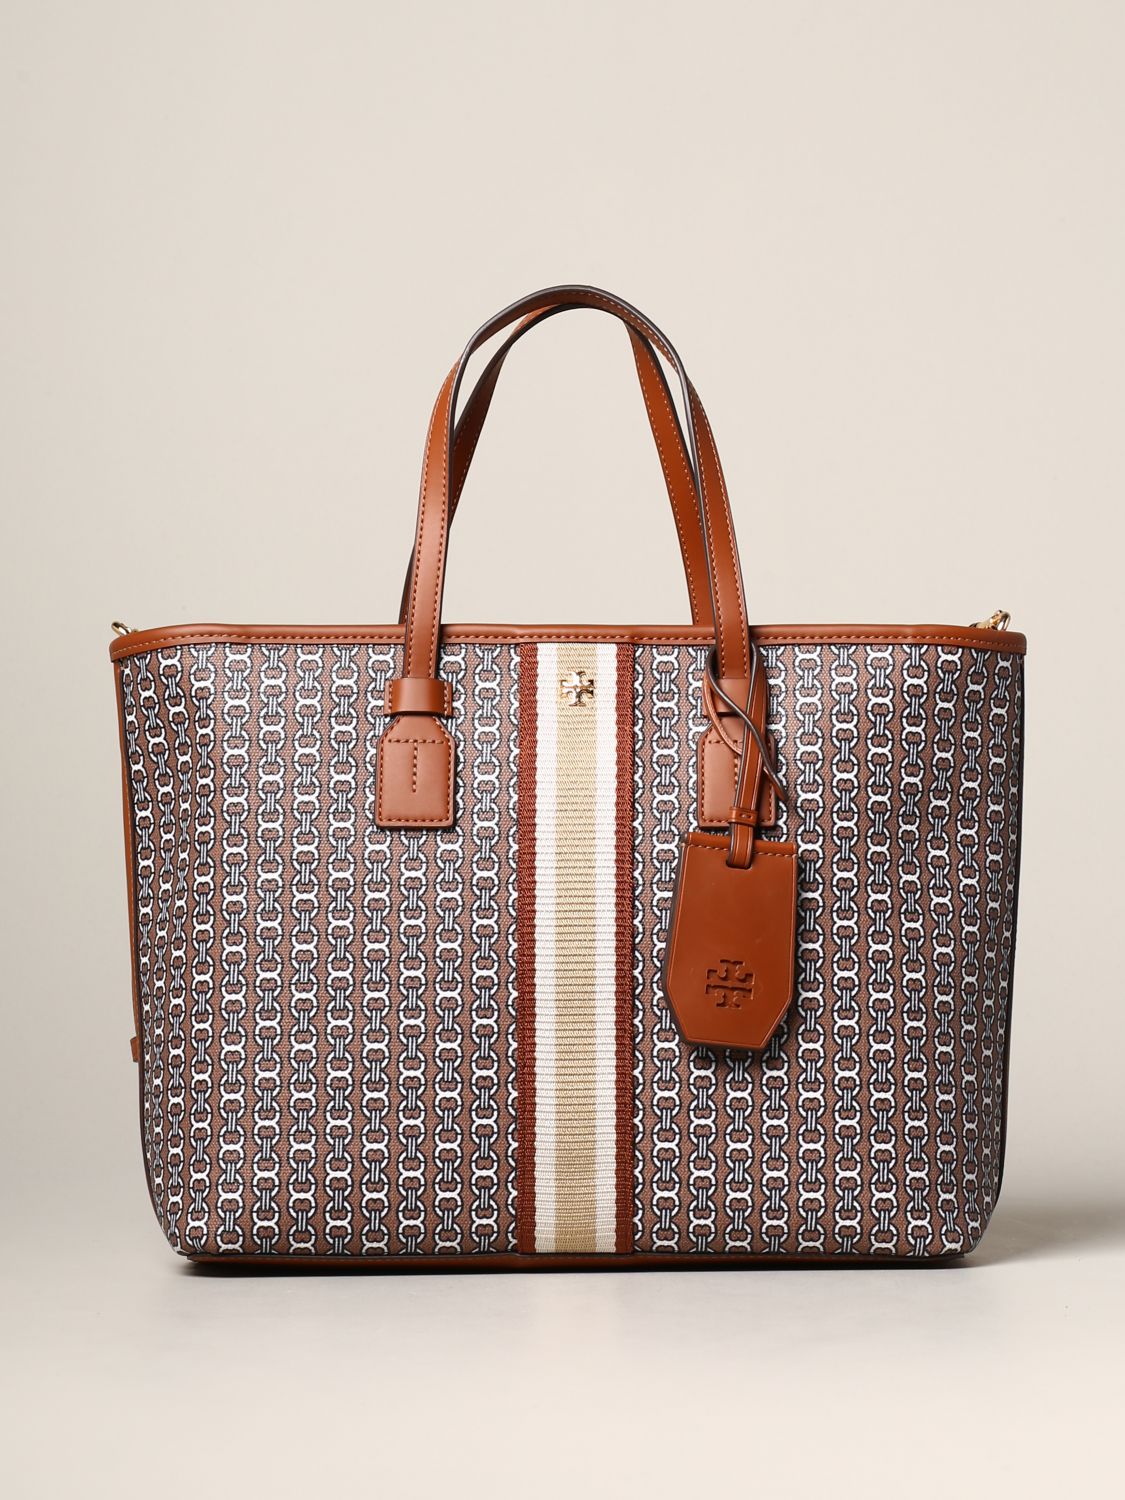 Tory Burch Outlet: Gemini Link bag in canvas with all over print - Brown | Tory  Burch tote bags 53304 online on 